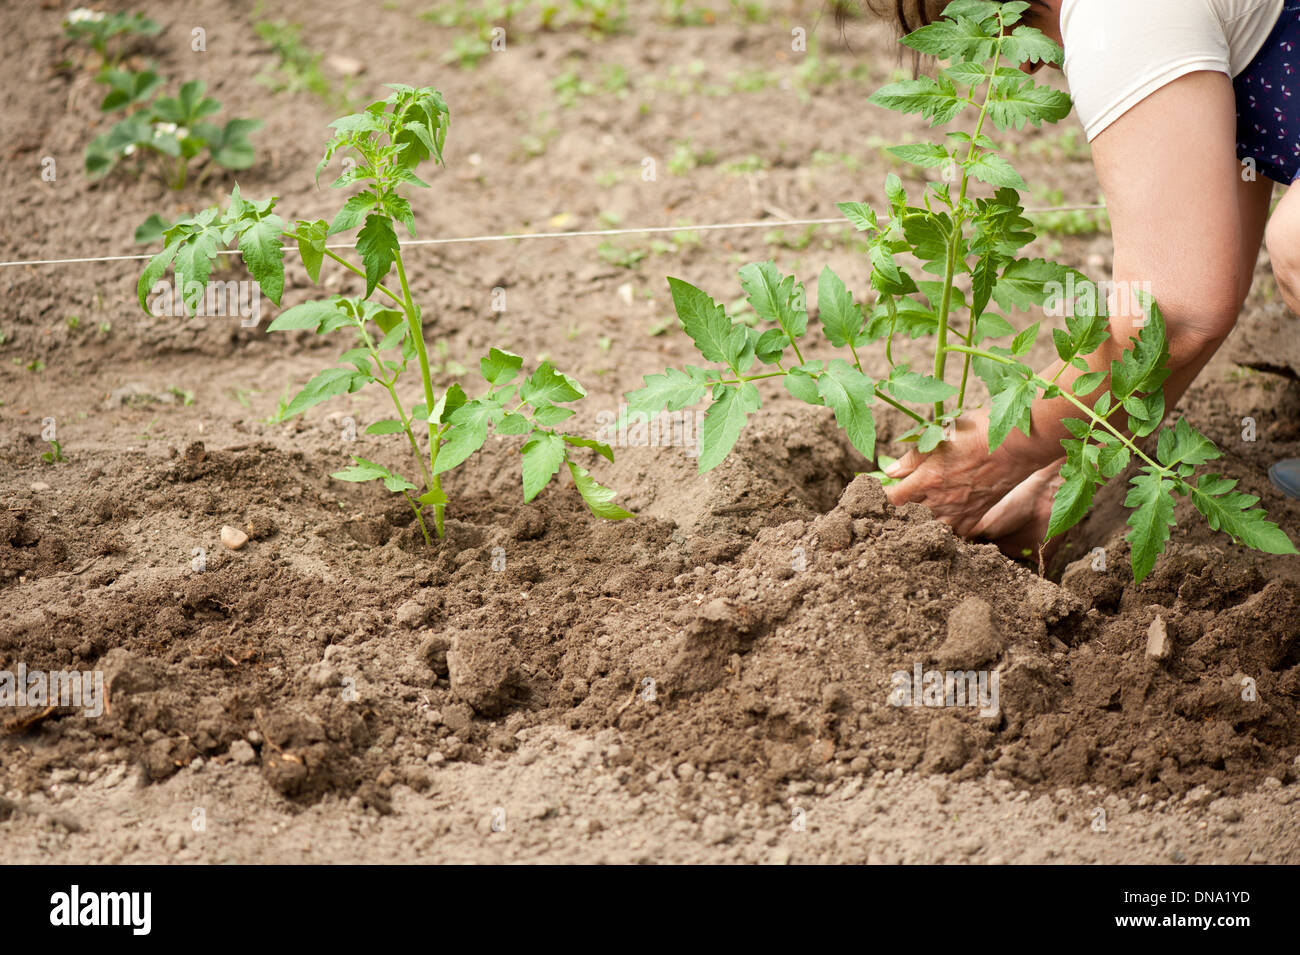 Planting tomato seedlings into the ground Stock Photo